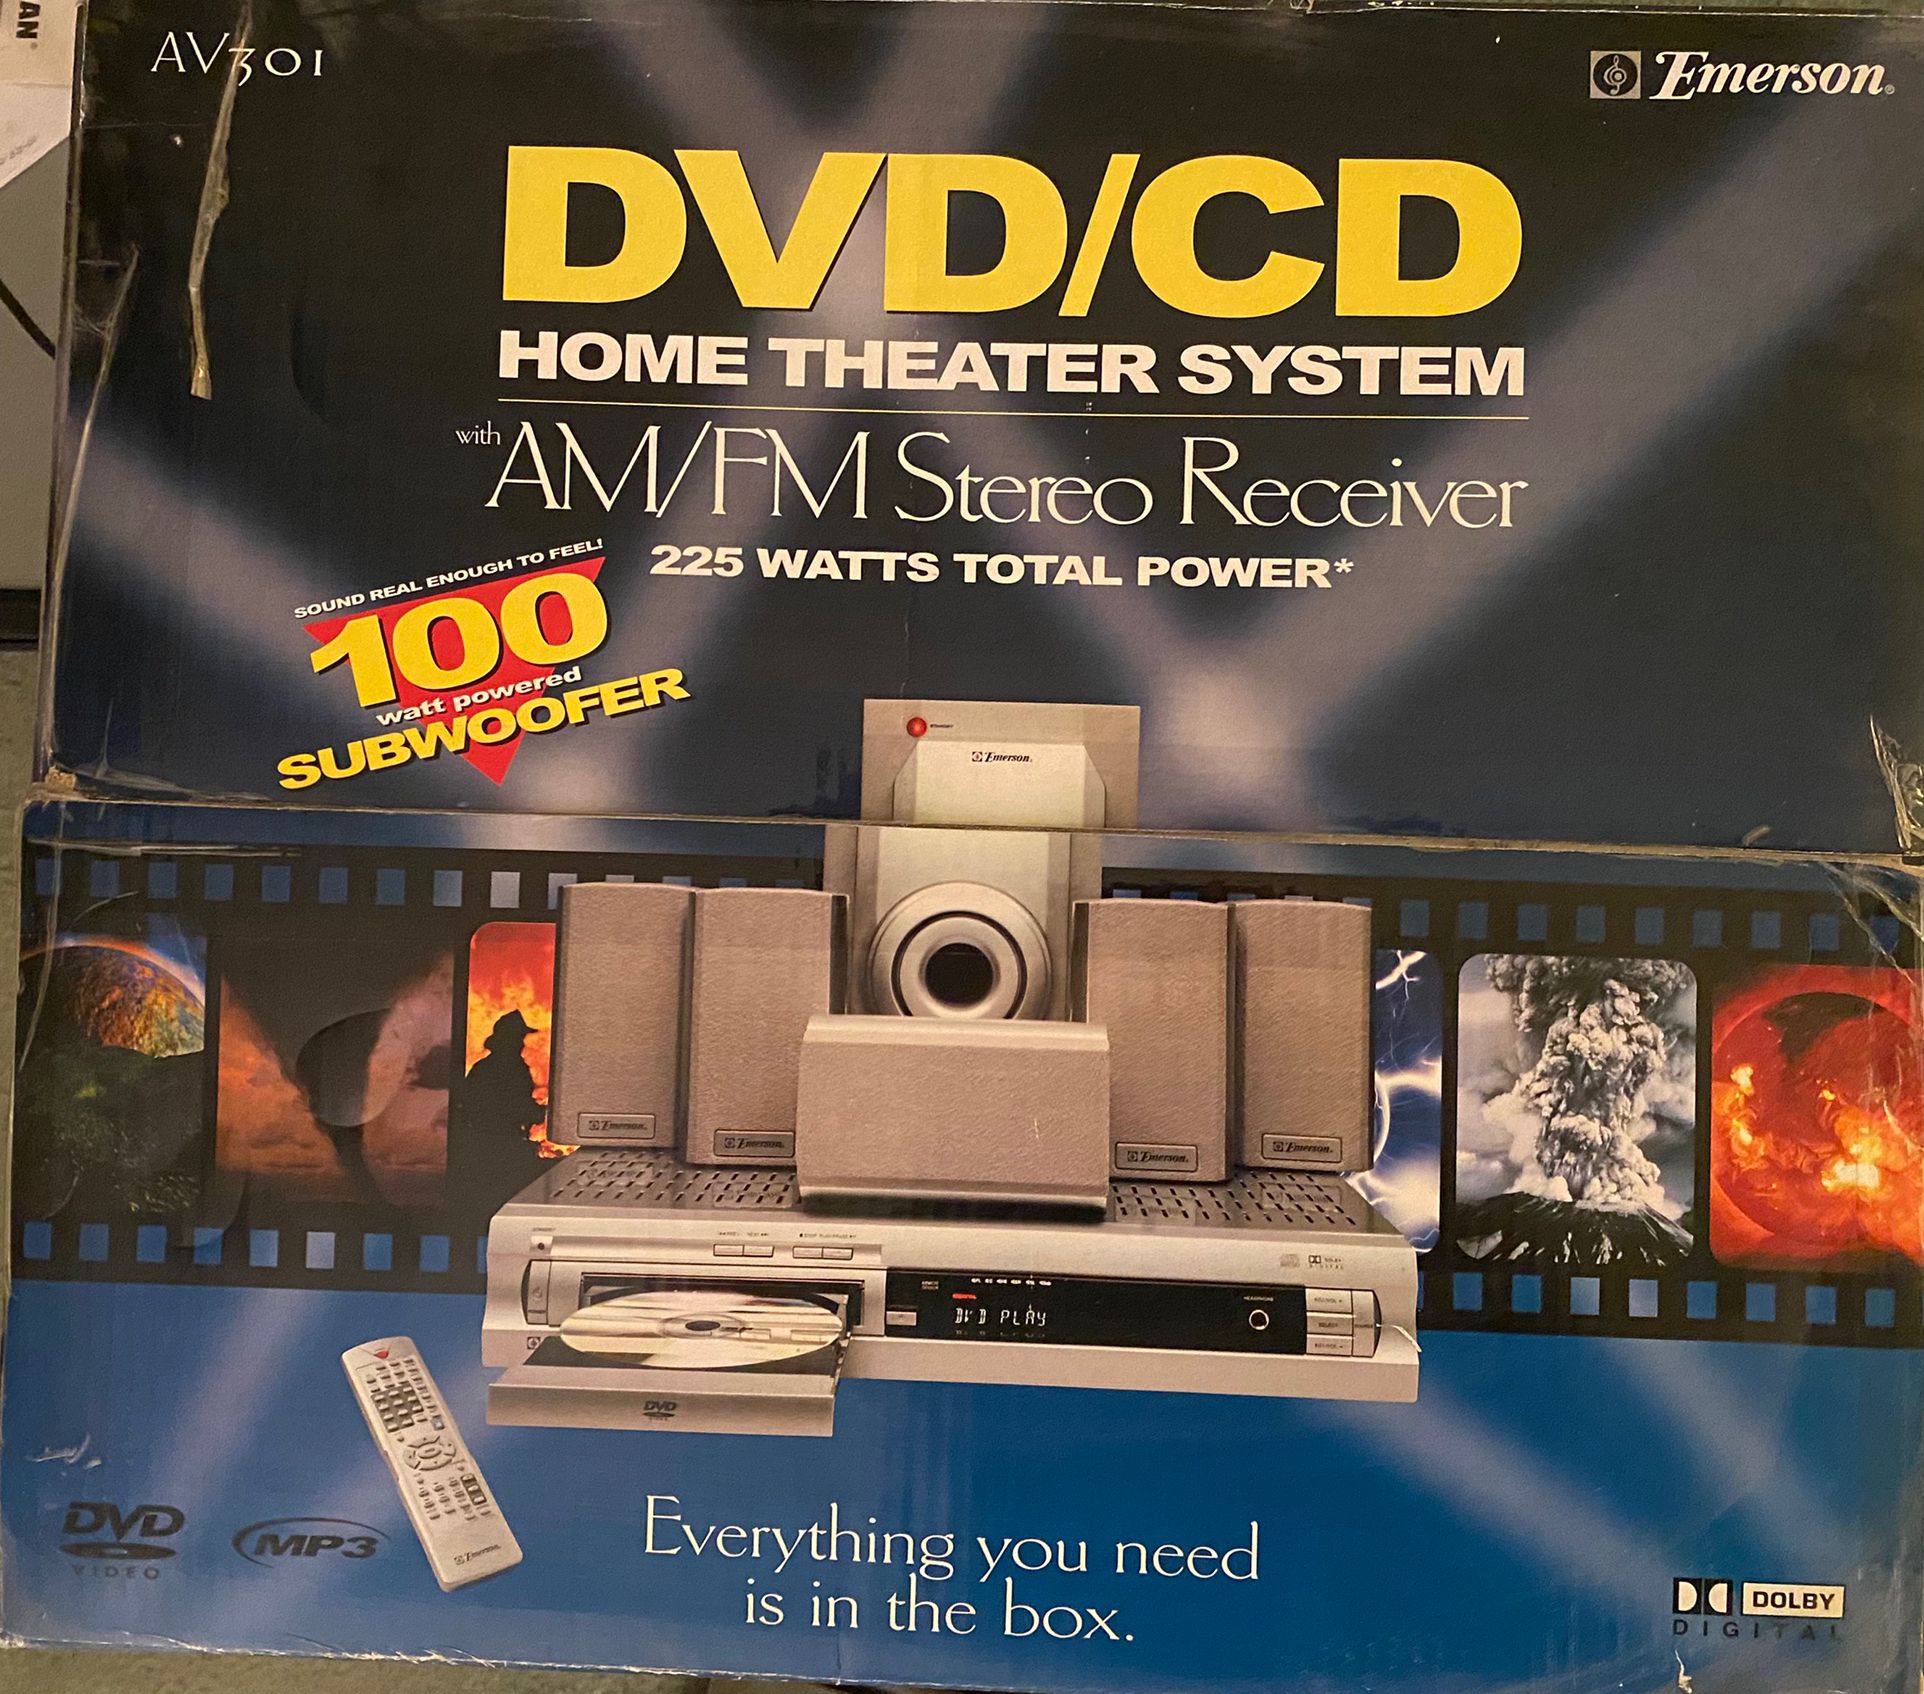 DVD/CD Home Theater System AM/FM Stereo Receiver